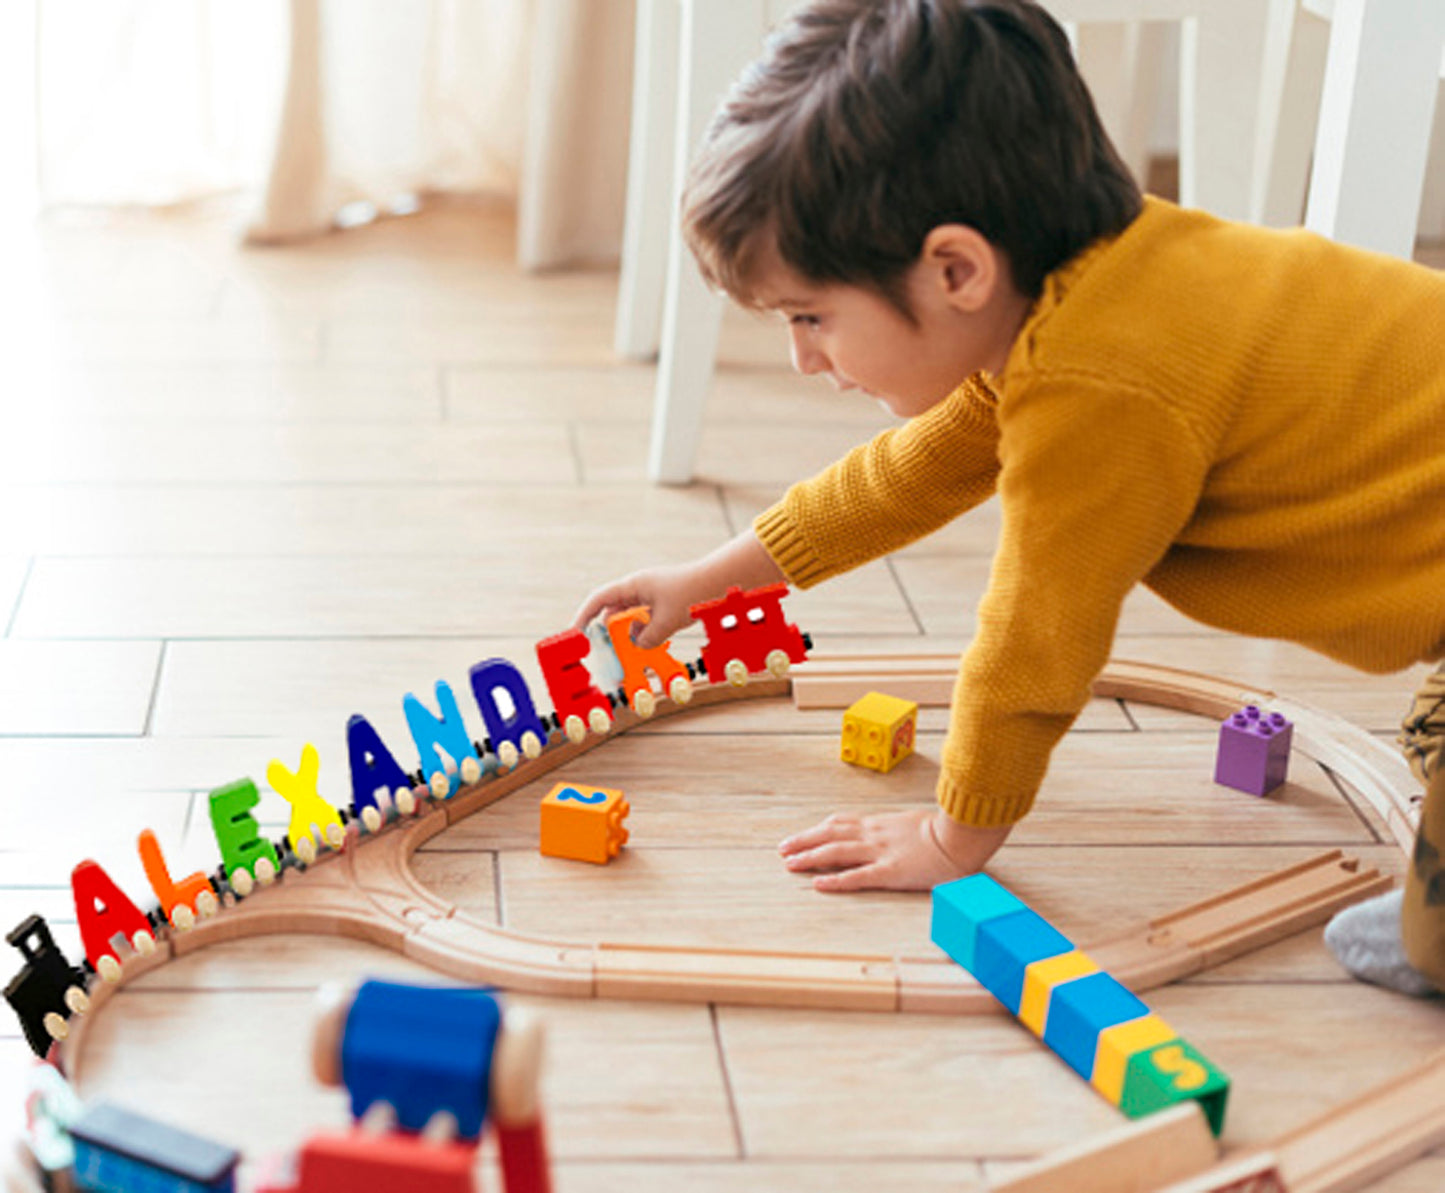 8 Letter Train Wooden Perosnalized Name Letters Includes Train & Wagon Letters Puzzle Includes Train & Wagon Free